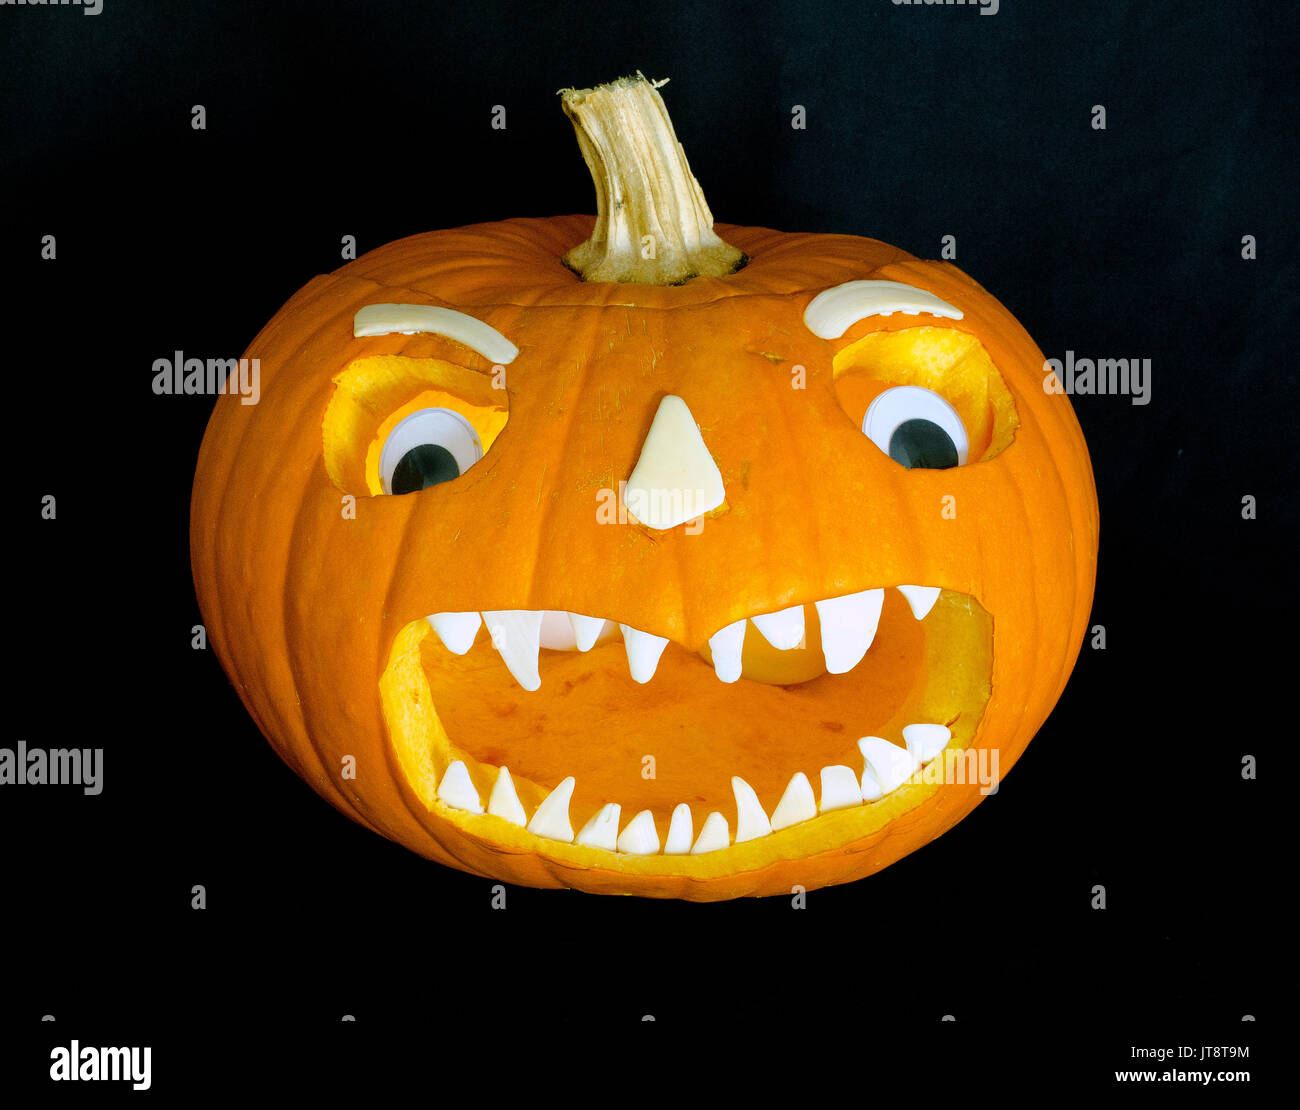 This Scary Jack O Lantern Face That Was Cut Into A Hollowed Out Stock Photo Alamy,Gas Dryer Vs Electric Dryer